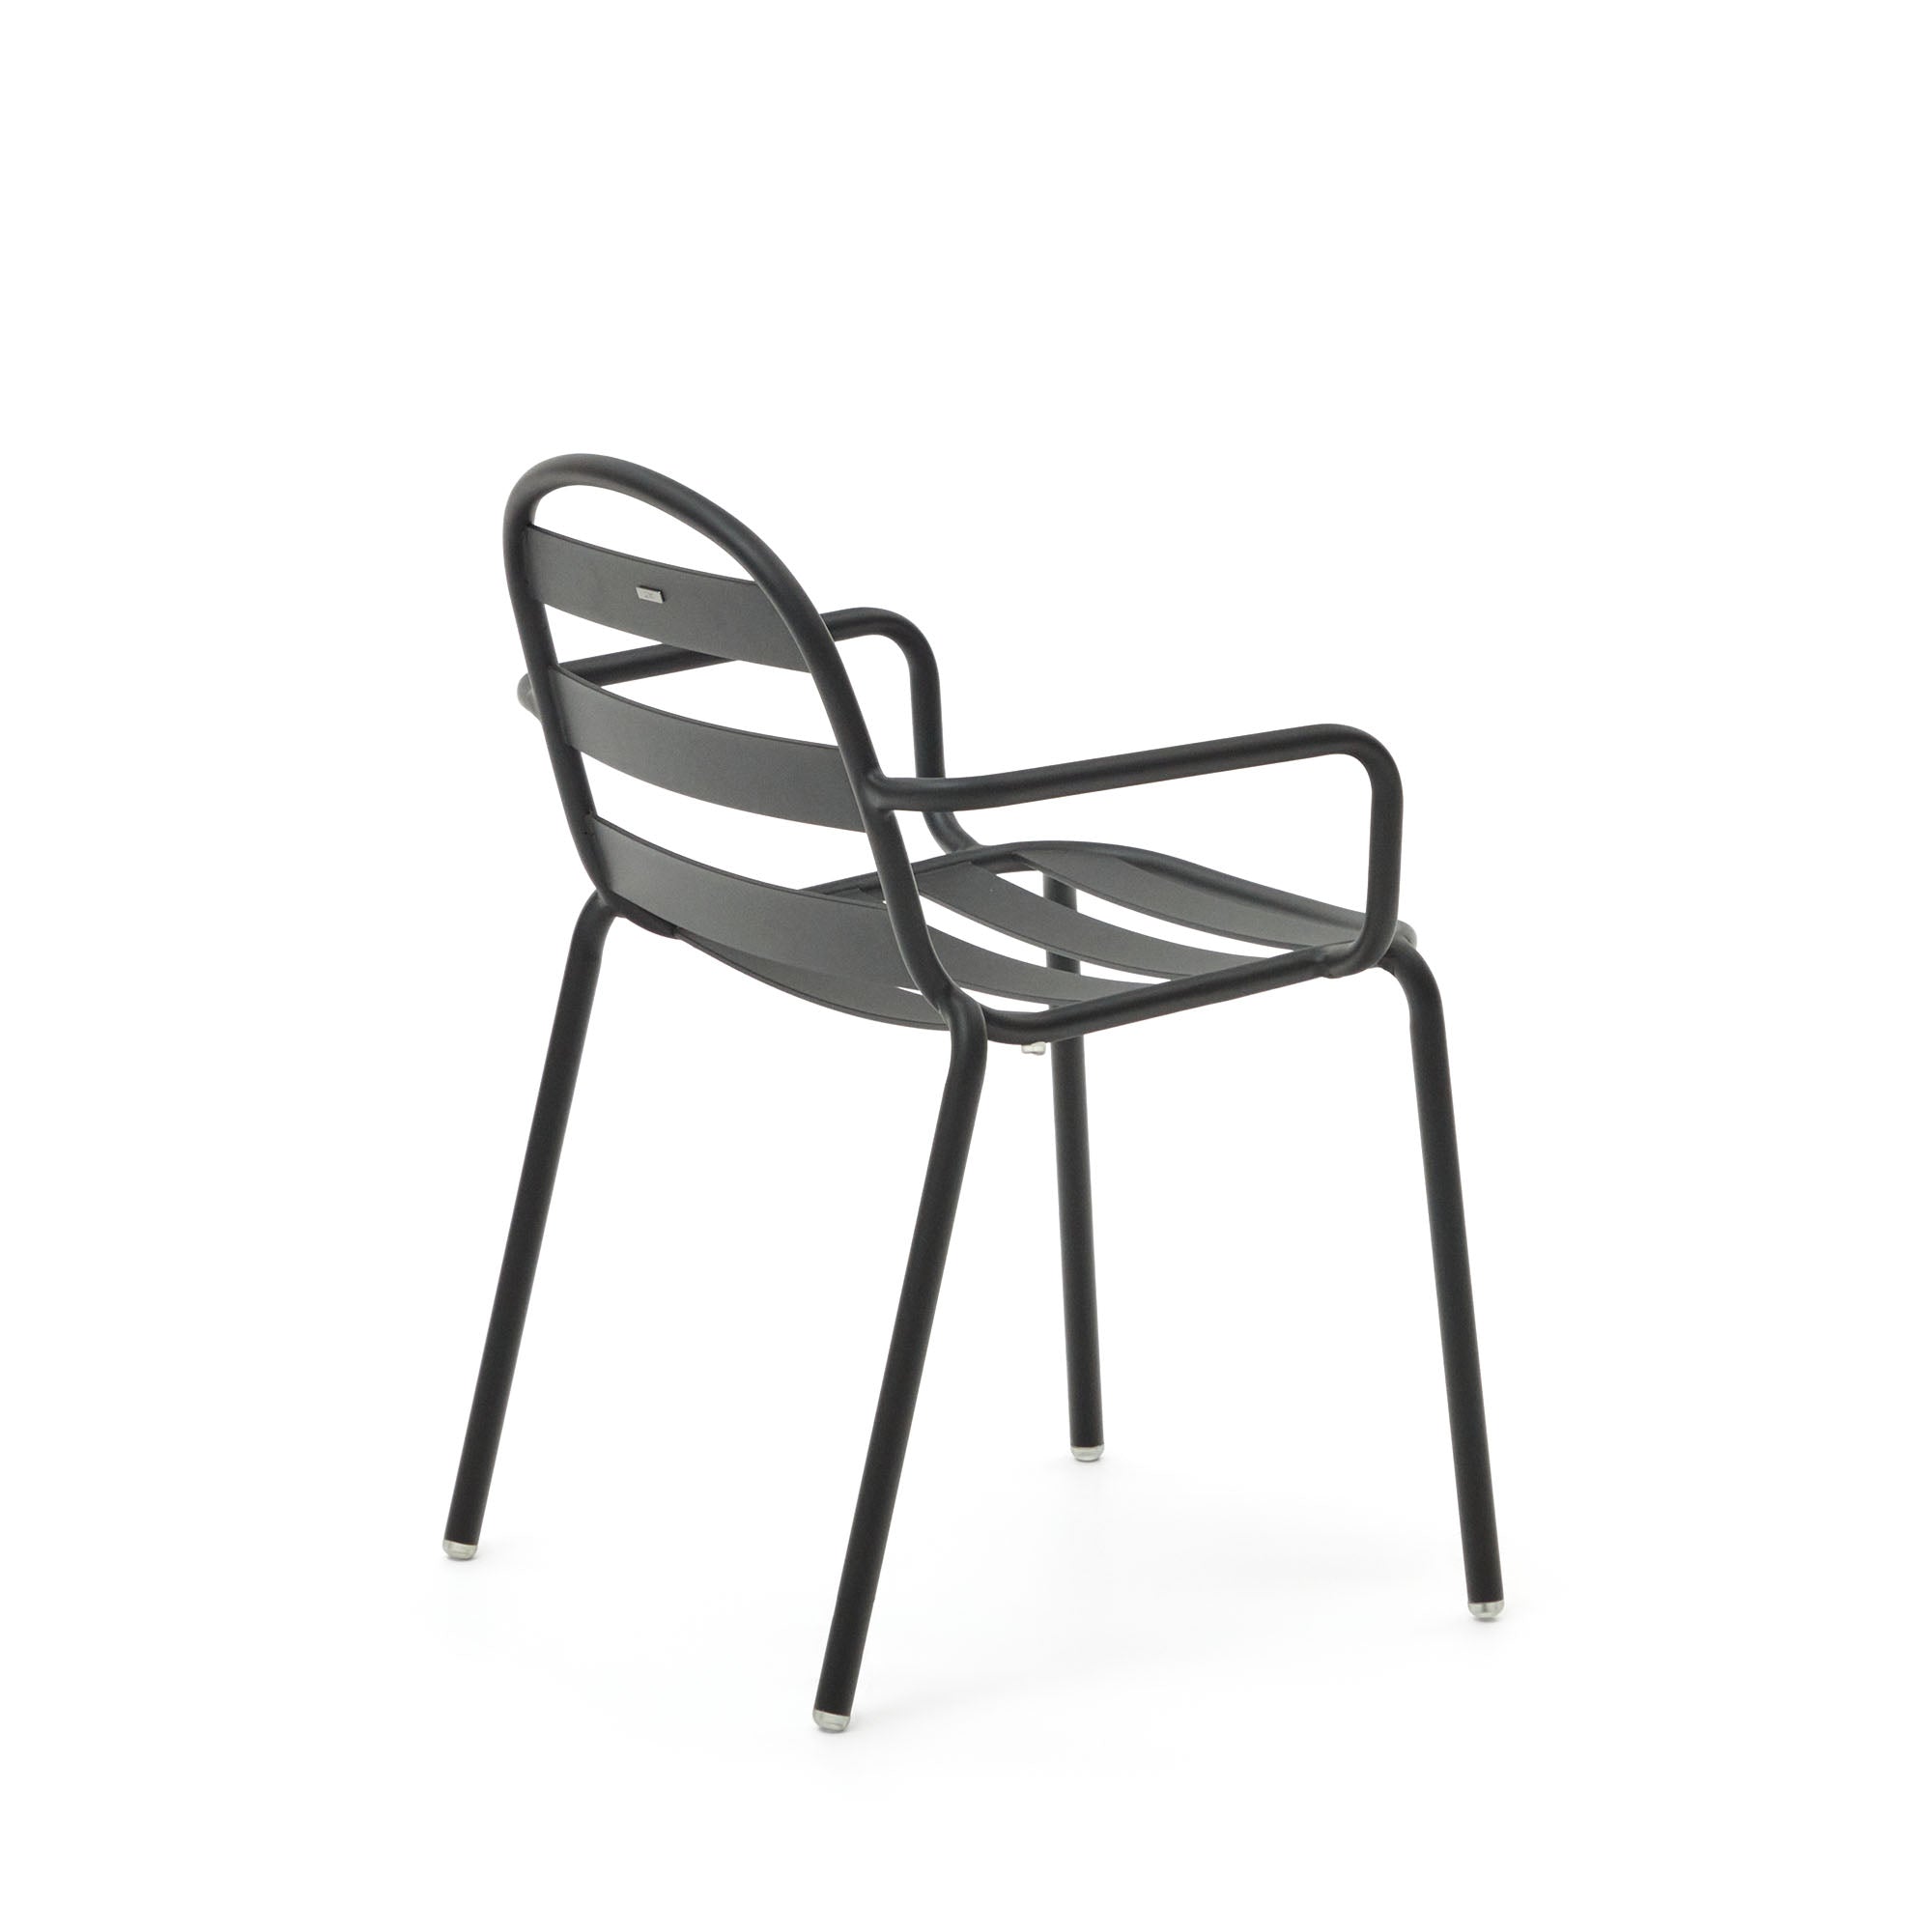 Joncols stackable outdoor aluminium chair with a powder coated grey finish